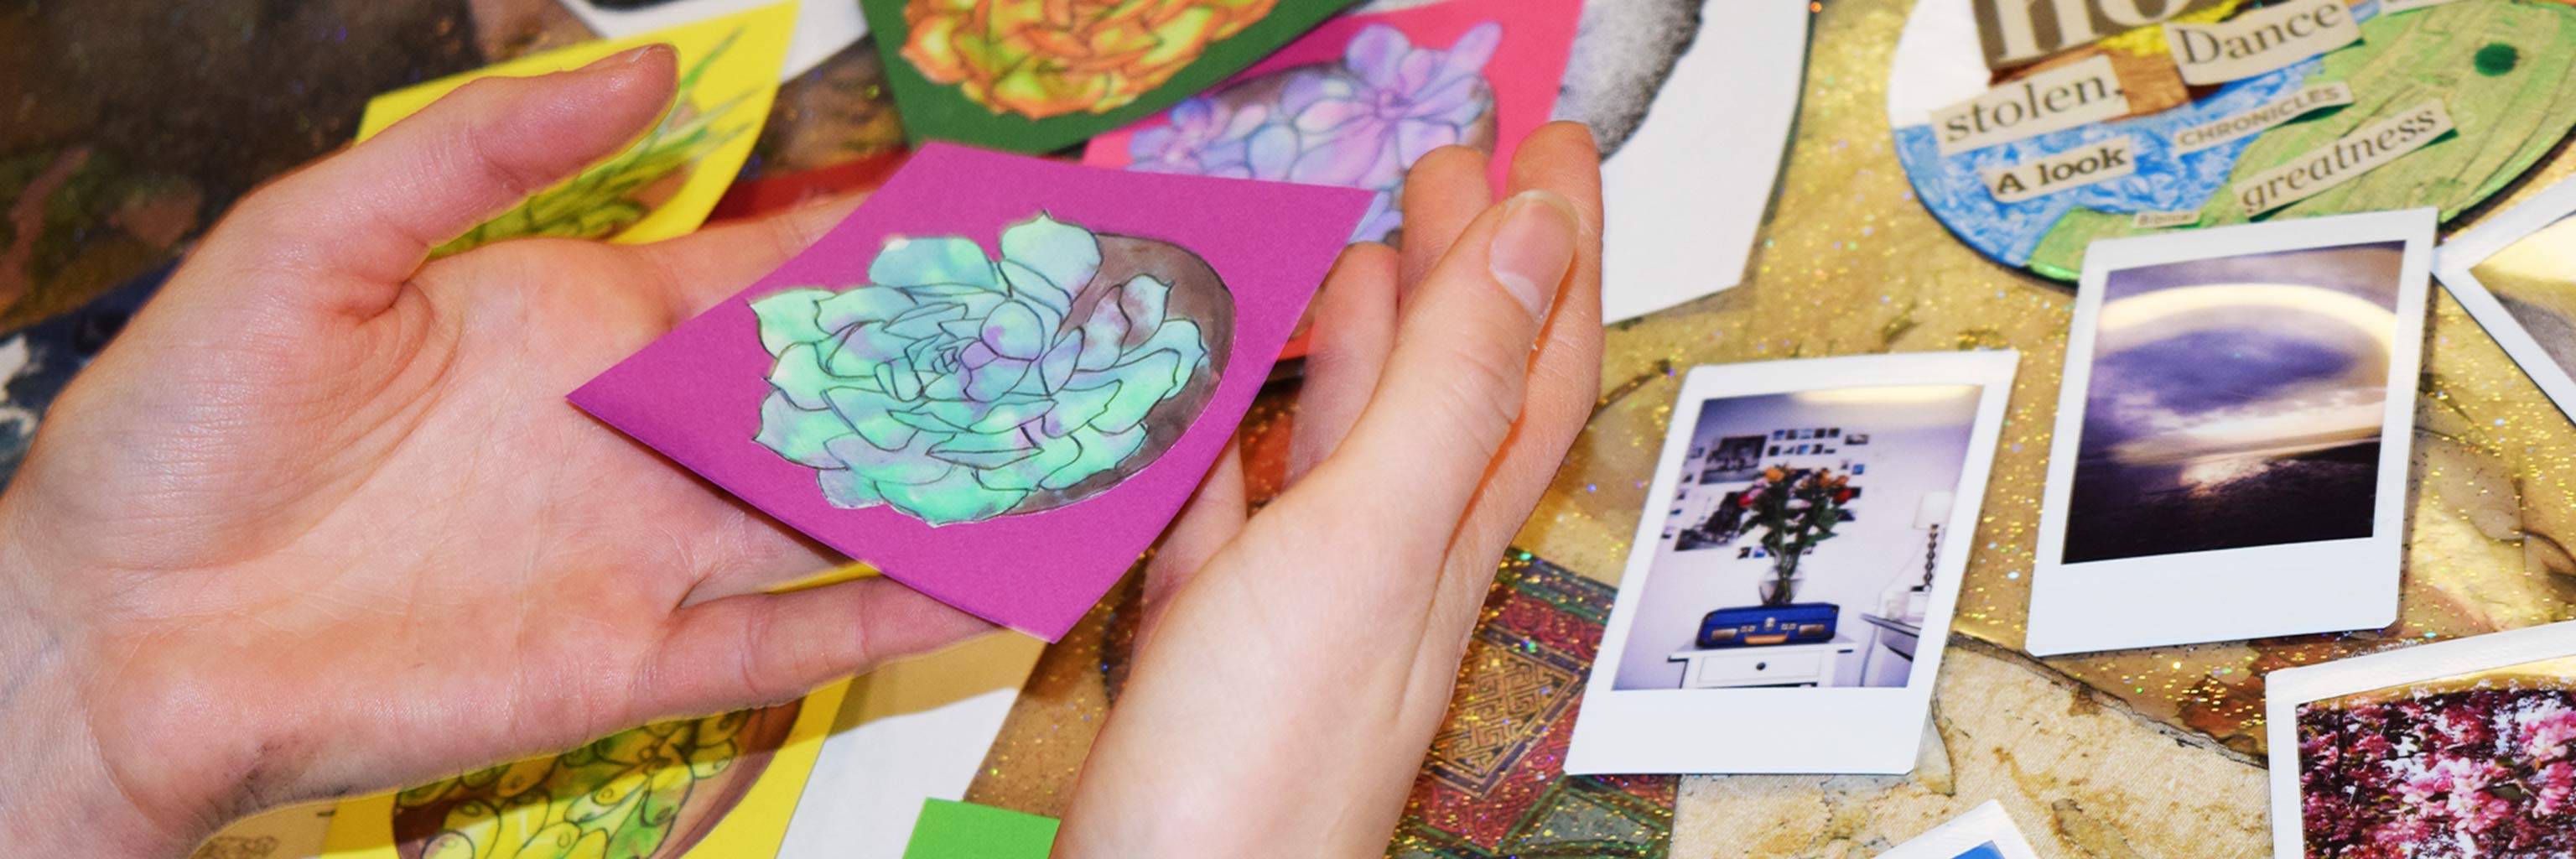 Close up of a pair of hands cradling a small painting of a flower